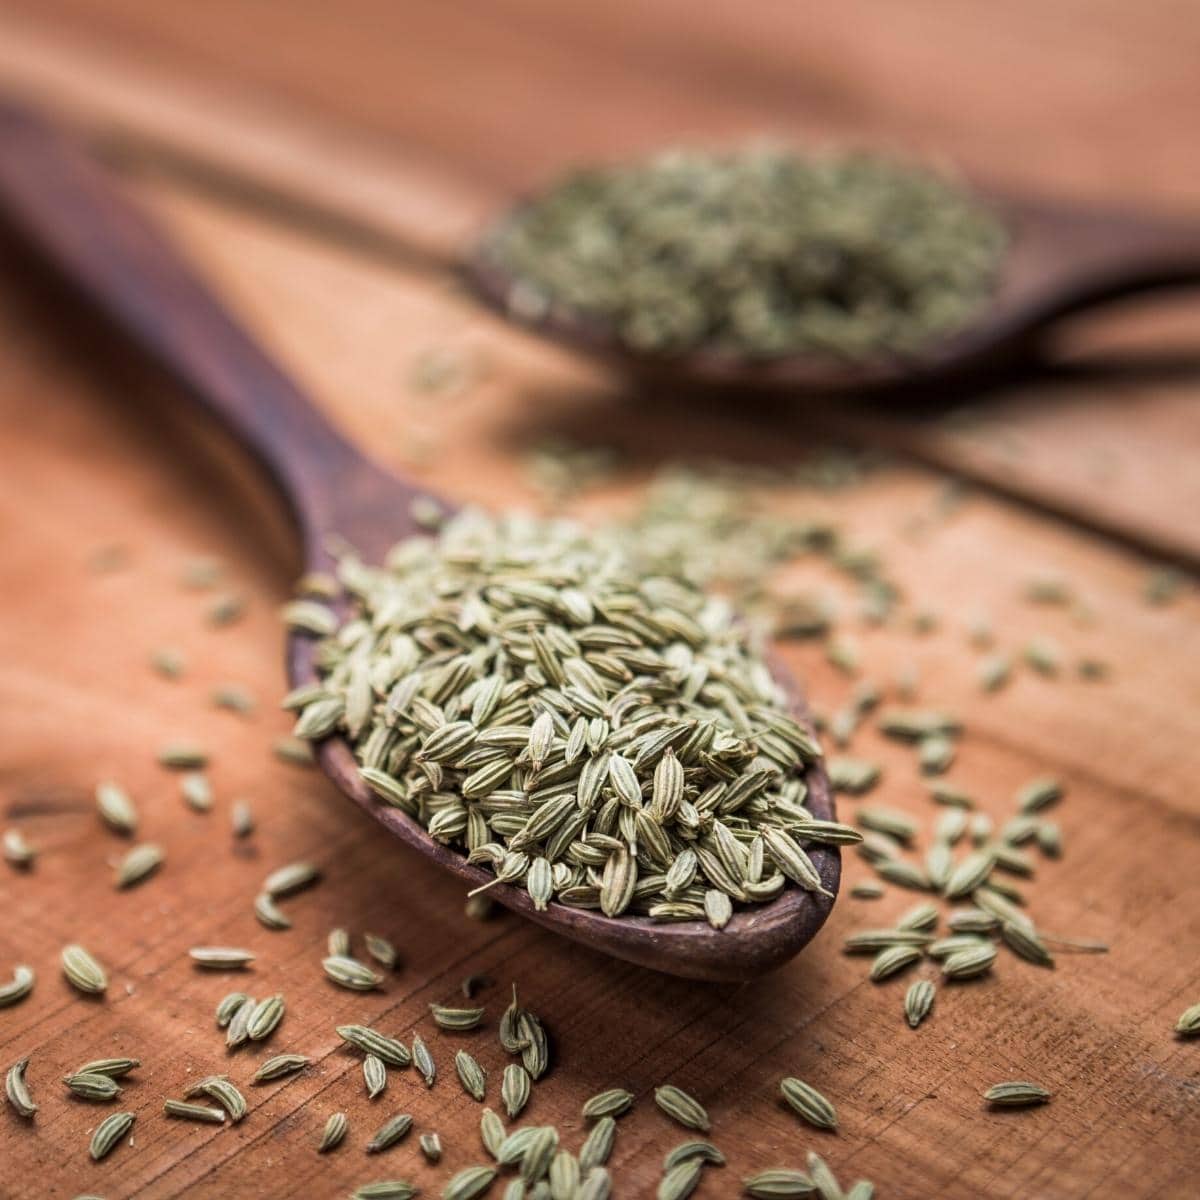 Fennel seeds in a small wooden spoon.